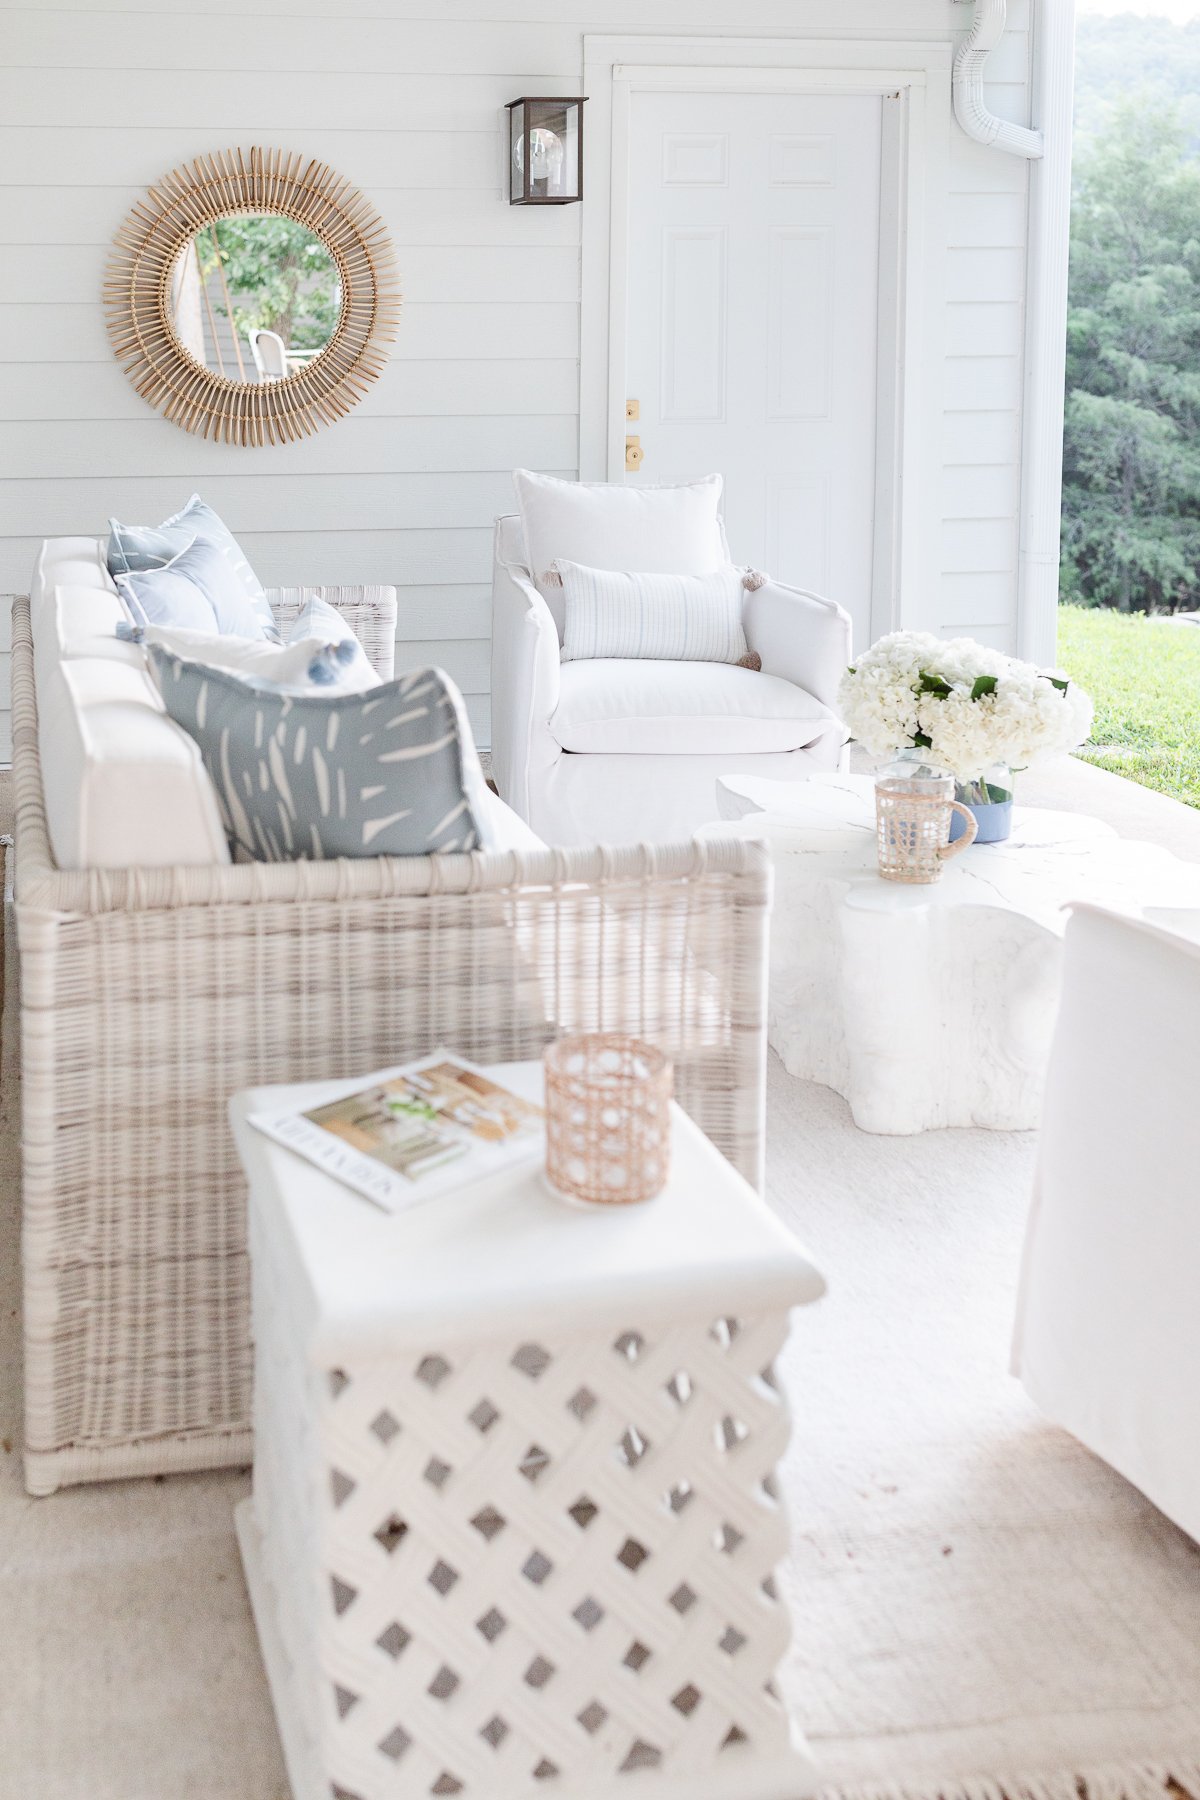 A white outdoor living room with wicker sofa.